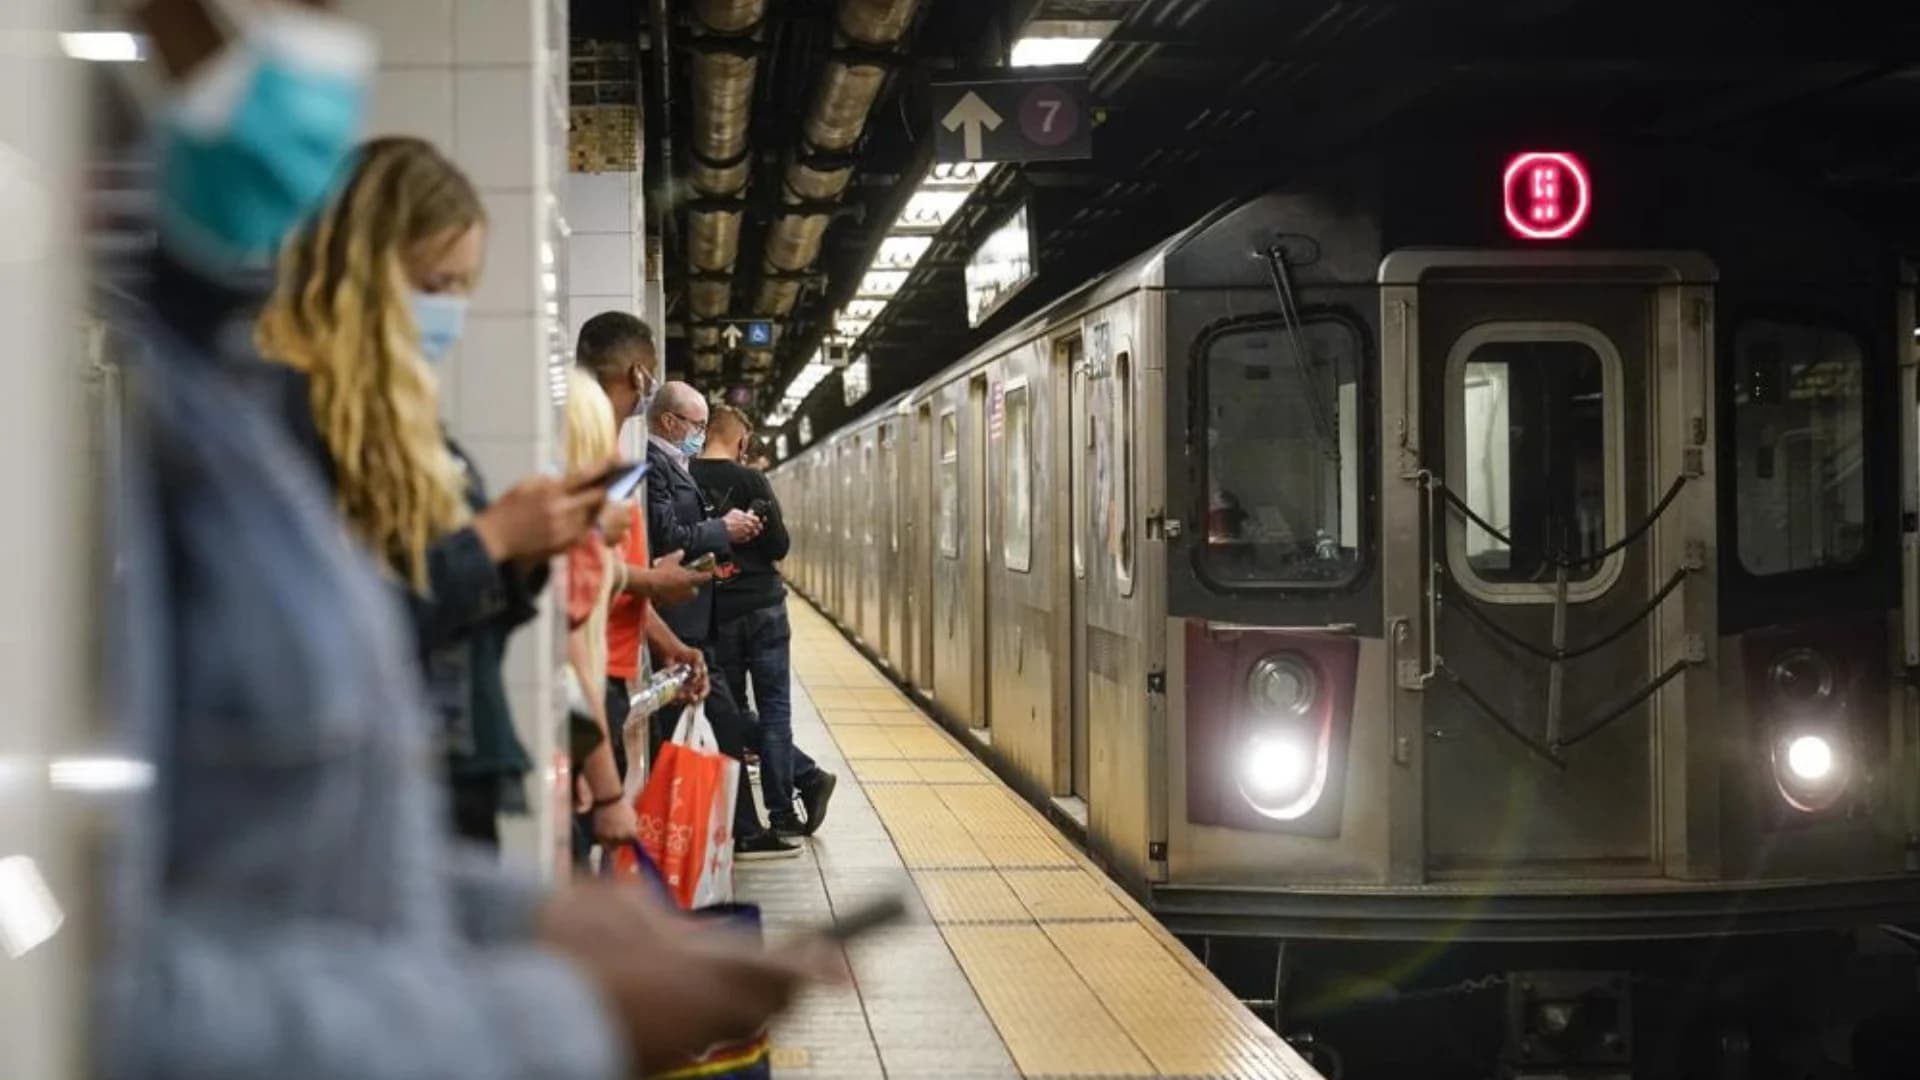 NYC subway crackdown starts with 143 arrests, 1,500 tickets